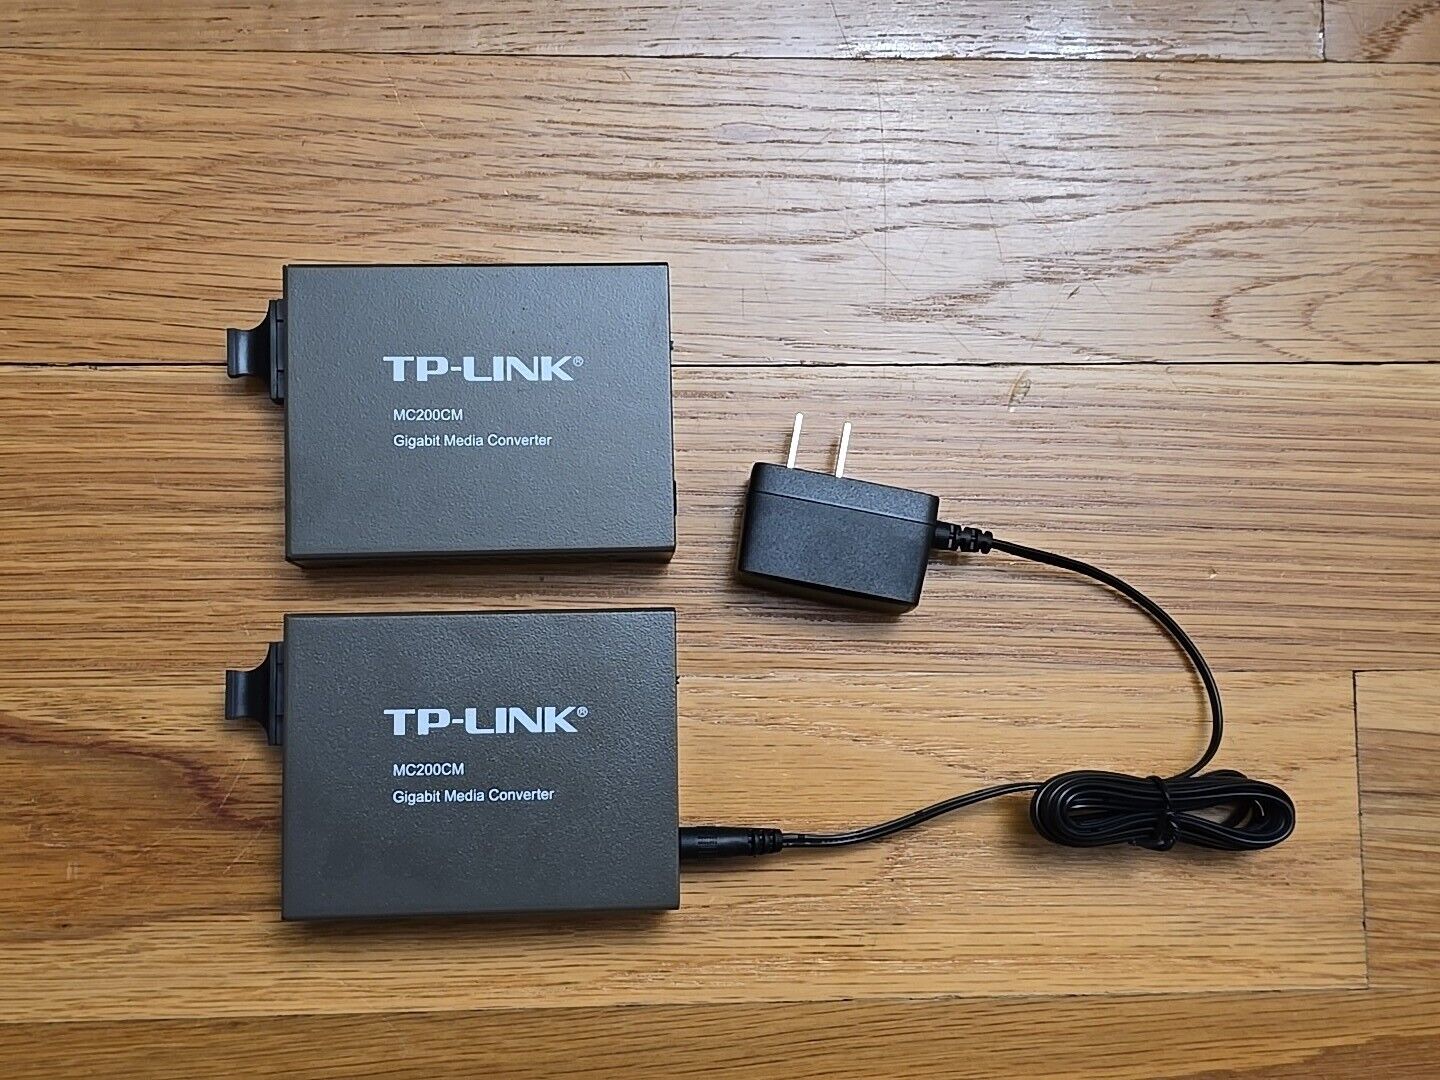 2x TP-LINK Gigabit Media Converters with 1x Power Supply